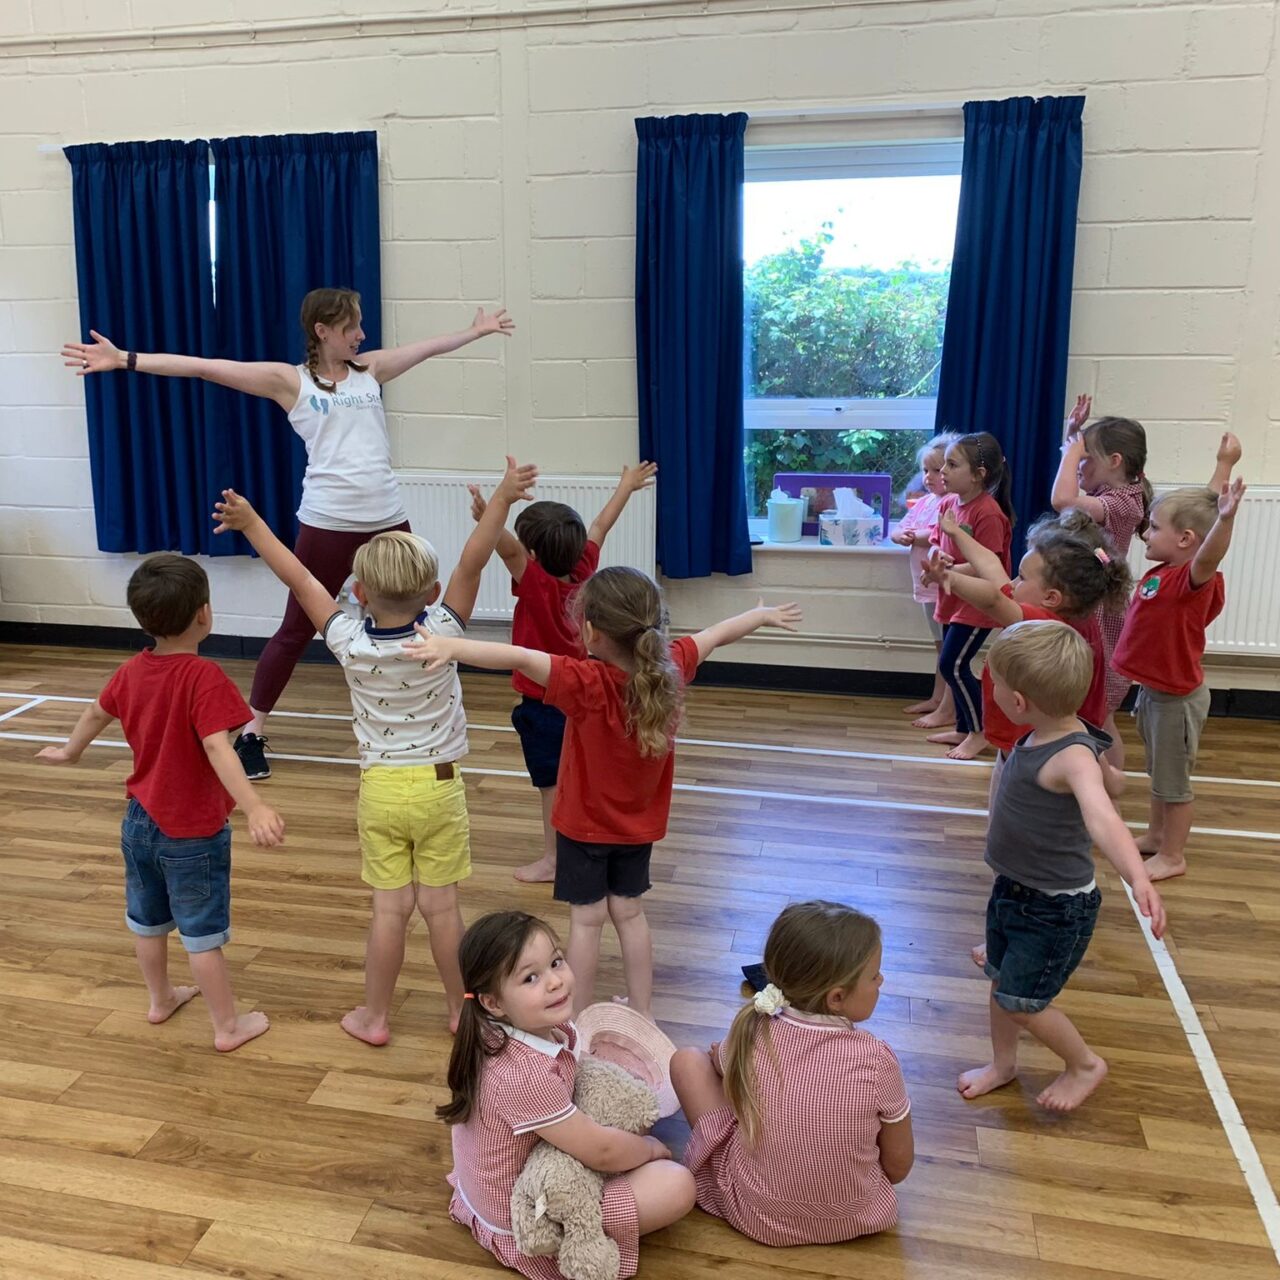 https://www.therightstepdc.co.uk/wp-content/uploads/2022/07/SQ-Kingswood-Pre-School-TRS-Tots-1280x1280.jpg